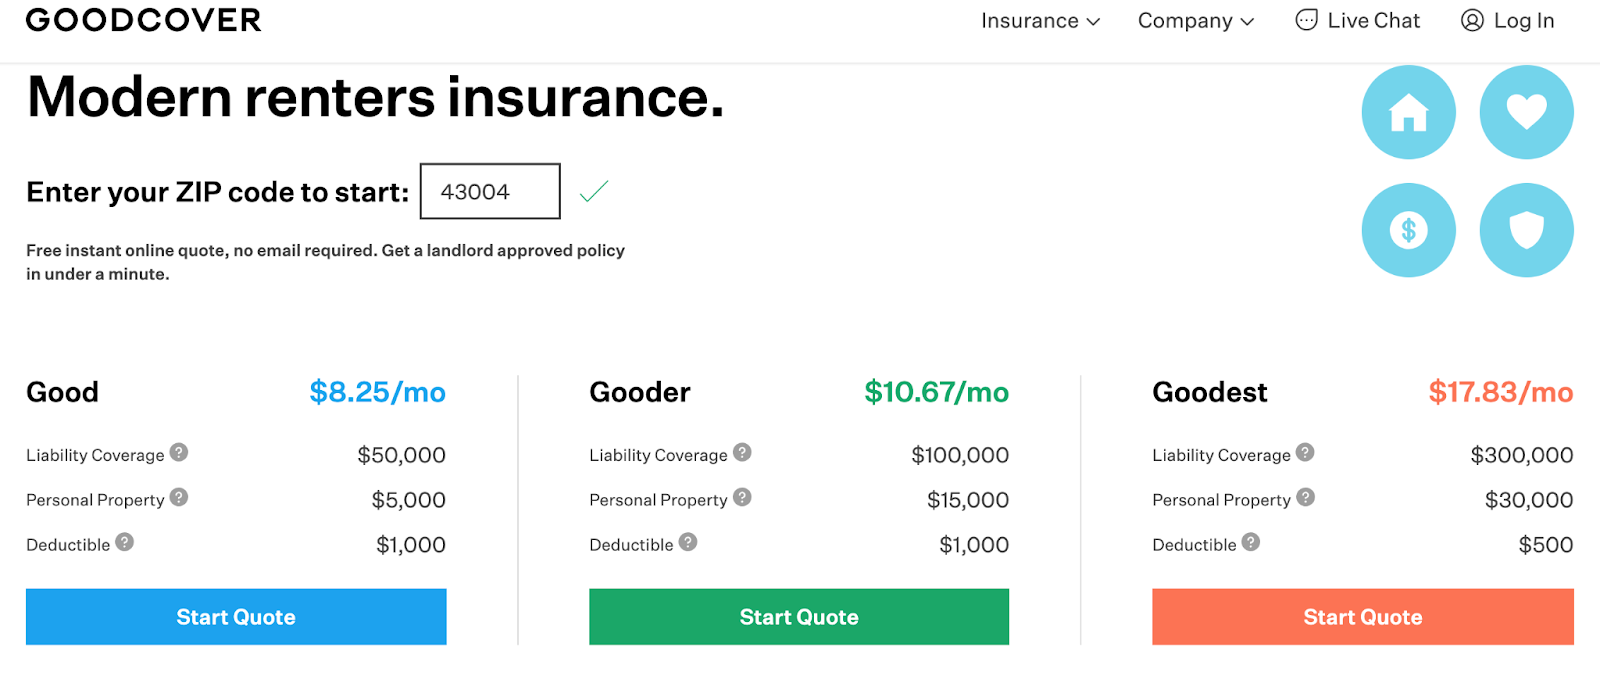 What Goodcover renters insurance costs for a sample Ohio location.